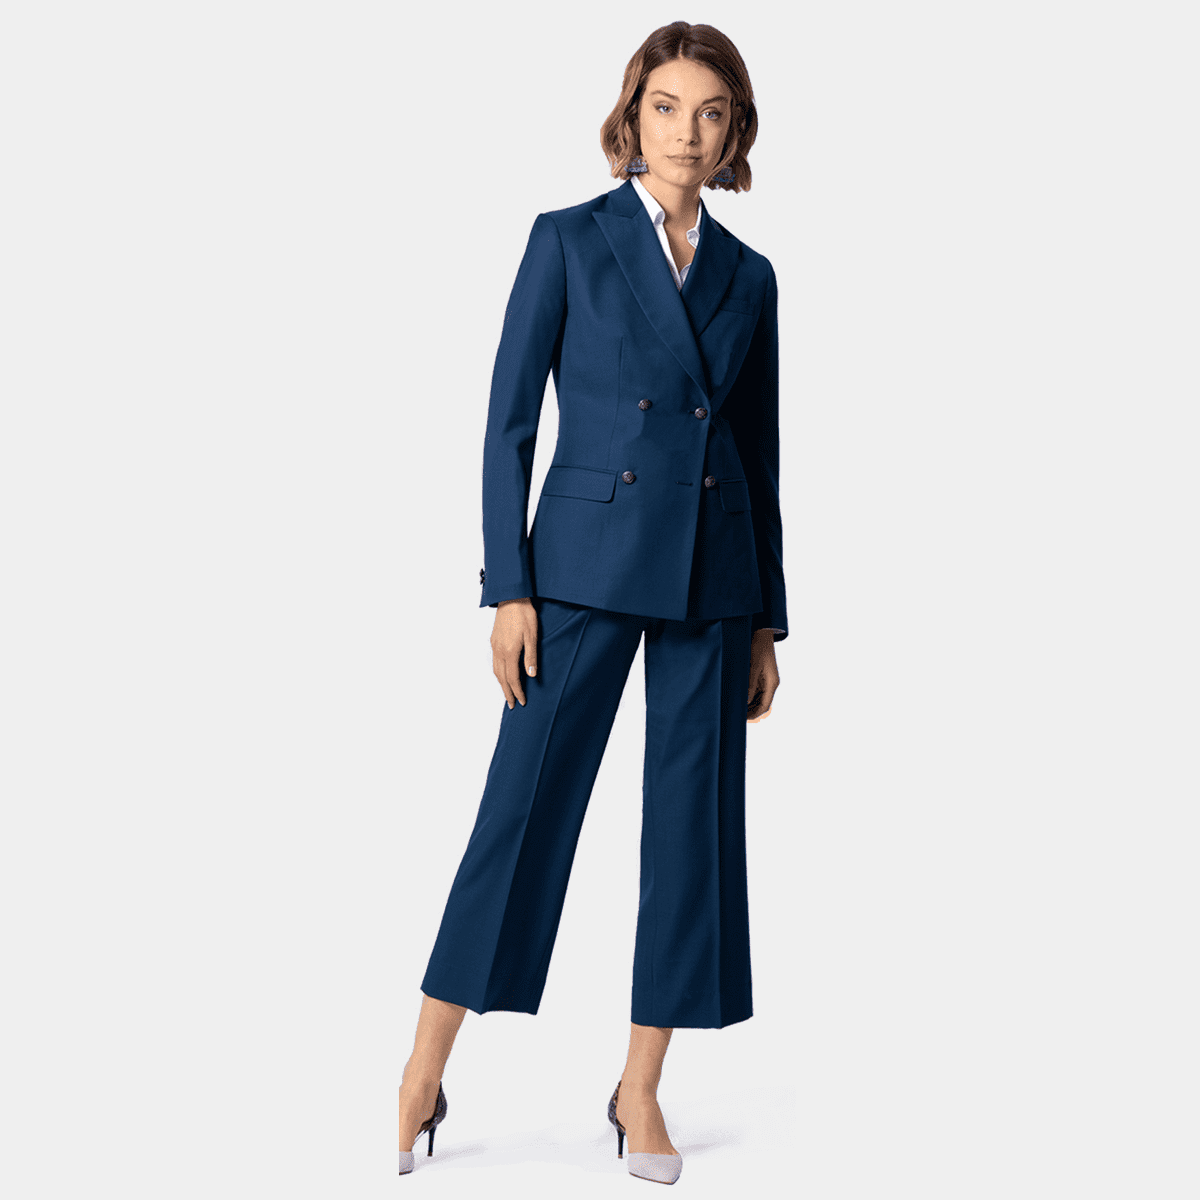 Royal Blue double breasted wool blend Wide Leg Pant Suit $509 | Sumissura